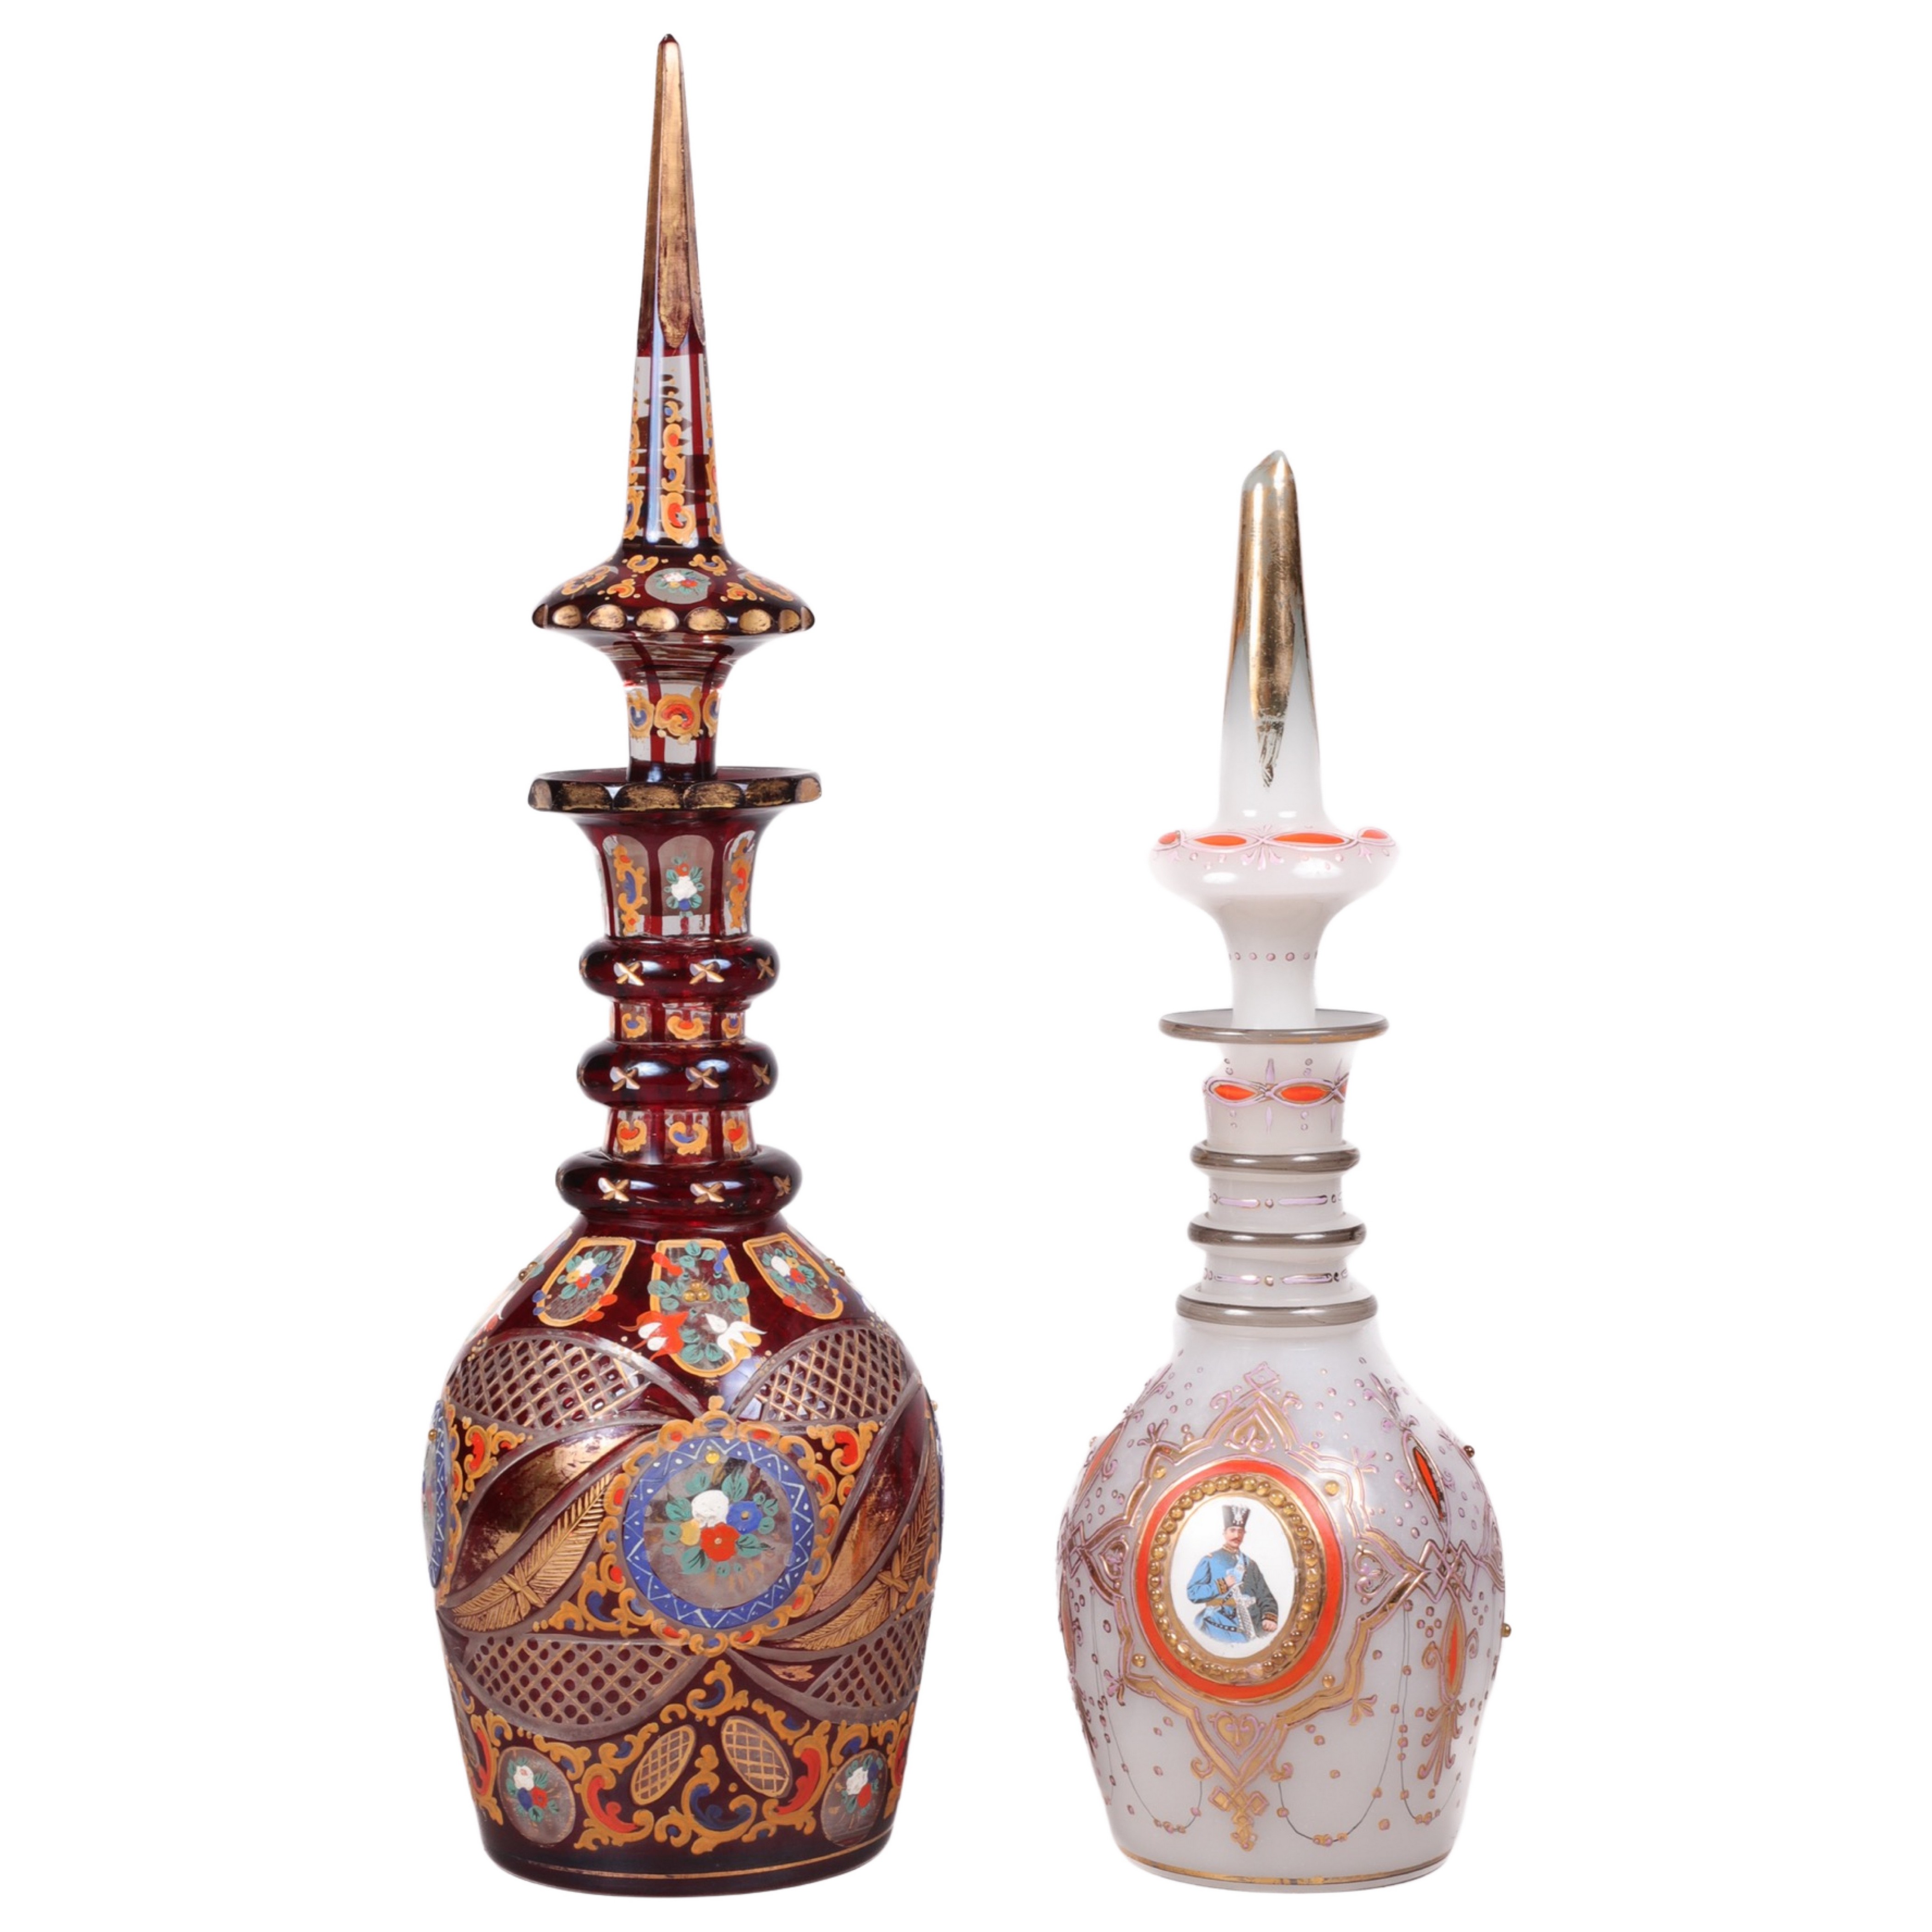  2 Moser or Bohemian glass decanters 3b4609